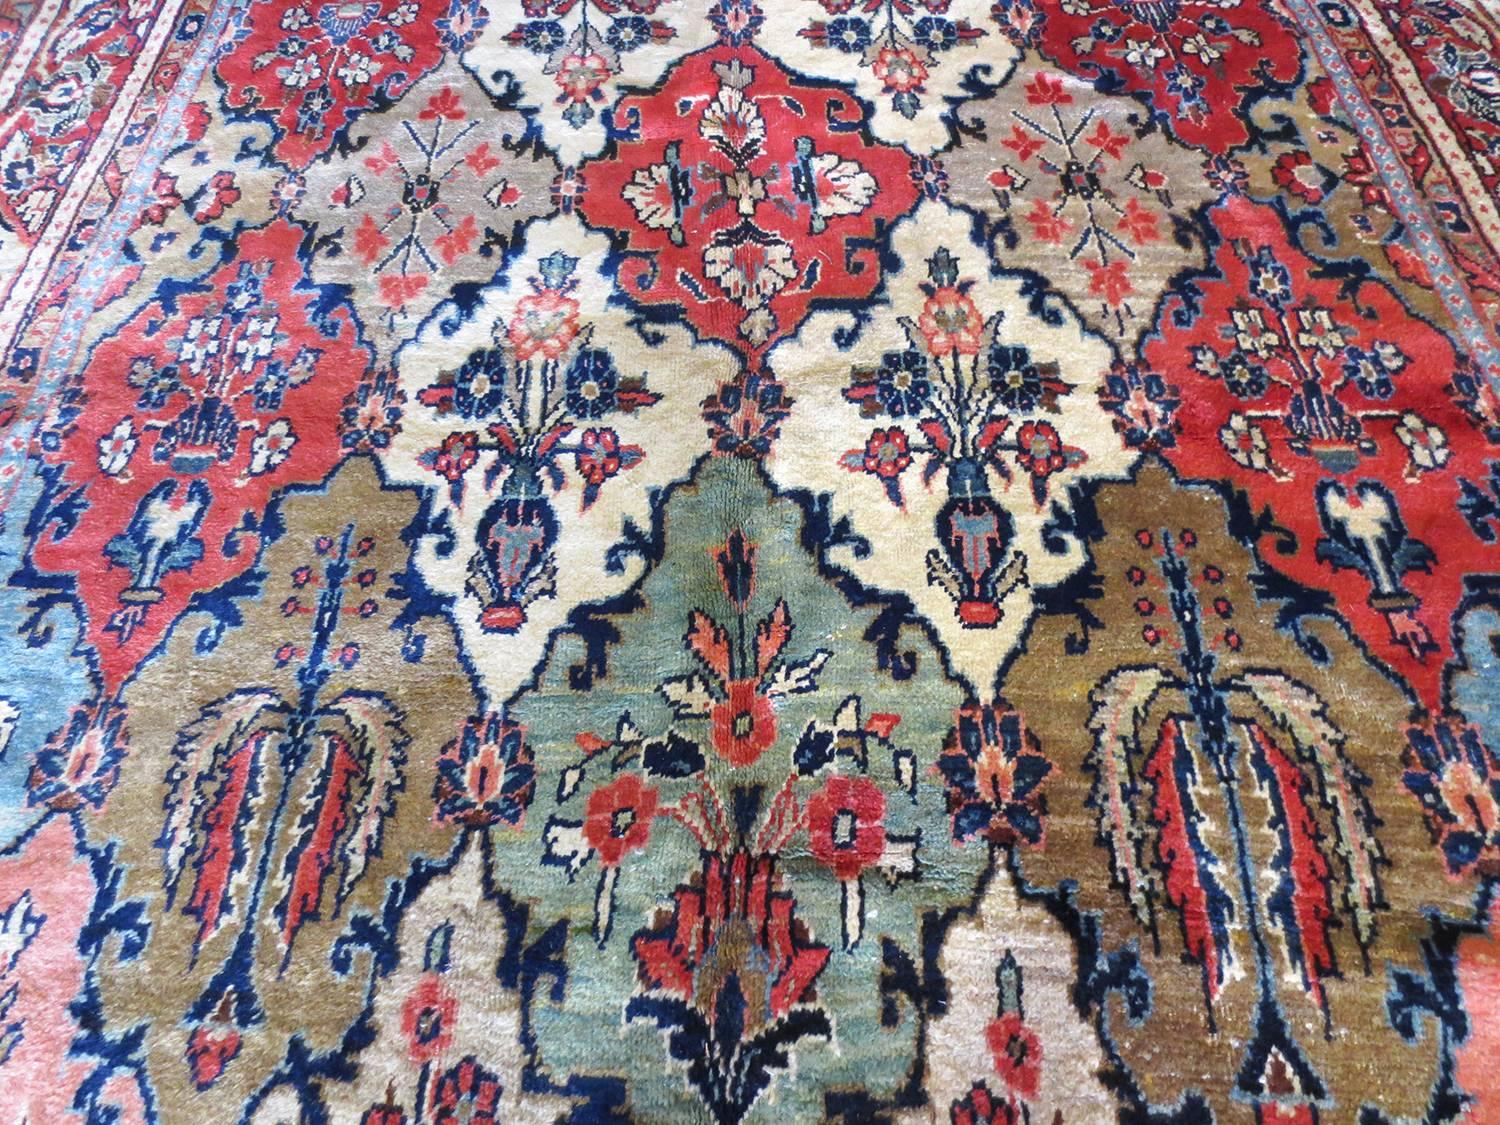 This is a vintage Bakhtari circa 1930s. It features a latticework of four-pointed figures containing beautiful floral design with rich blues, navy, ivory, salmon, yellows greens. A multitude of borders enclose the central field and is filled with